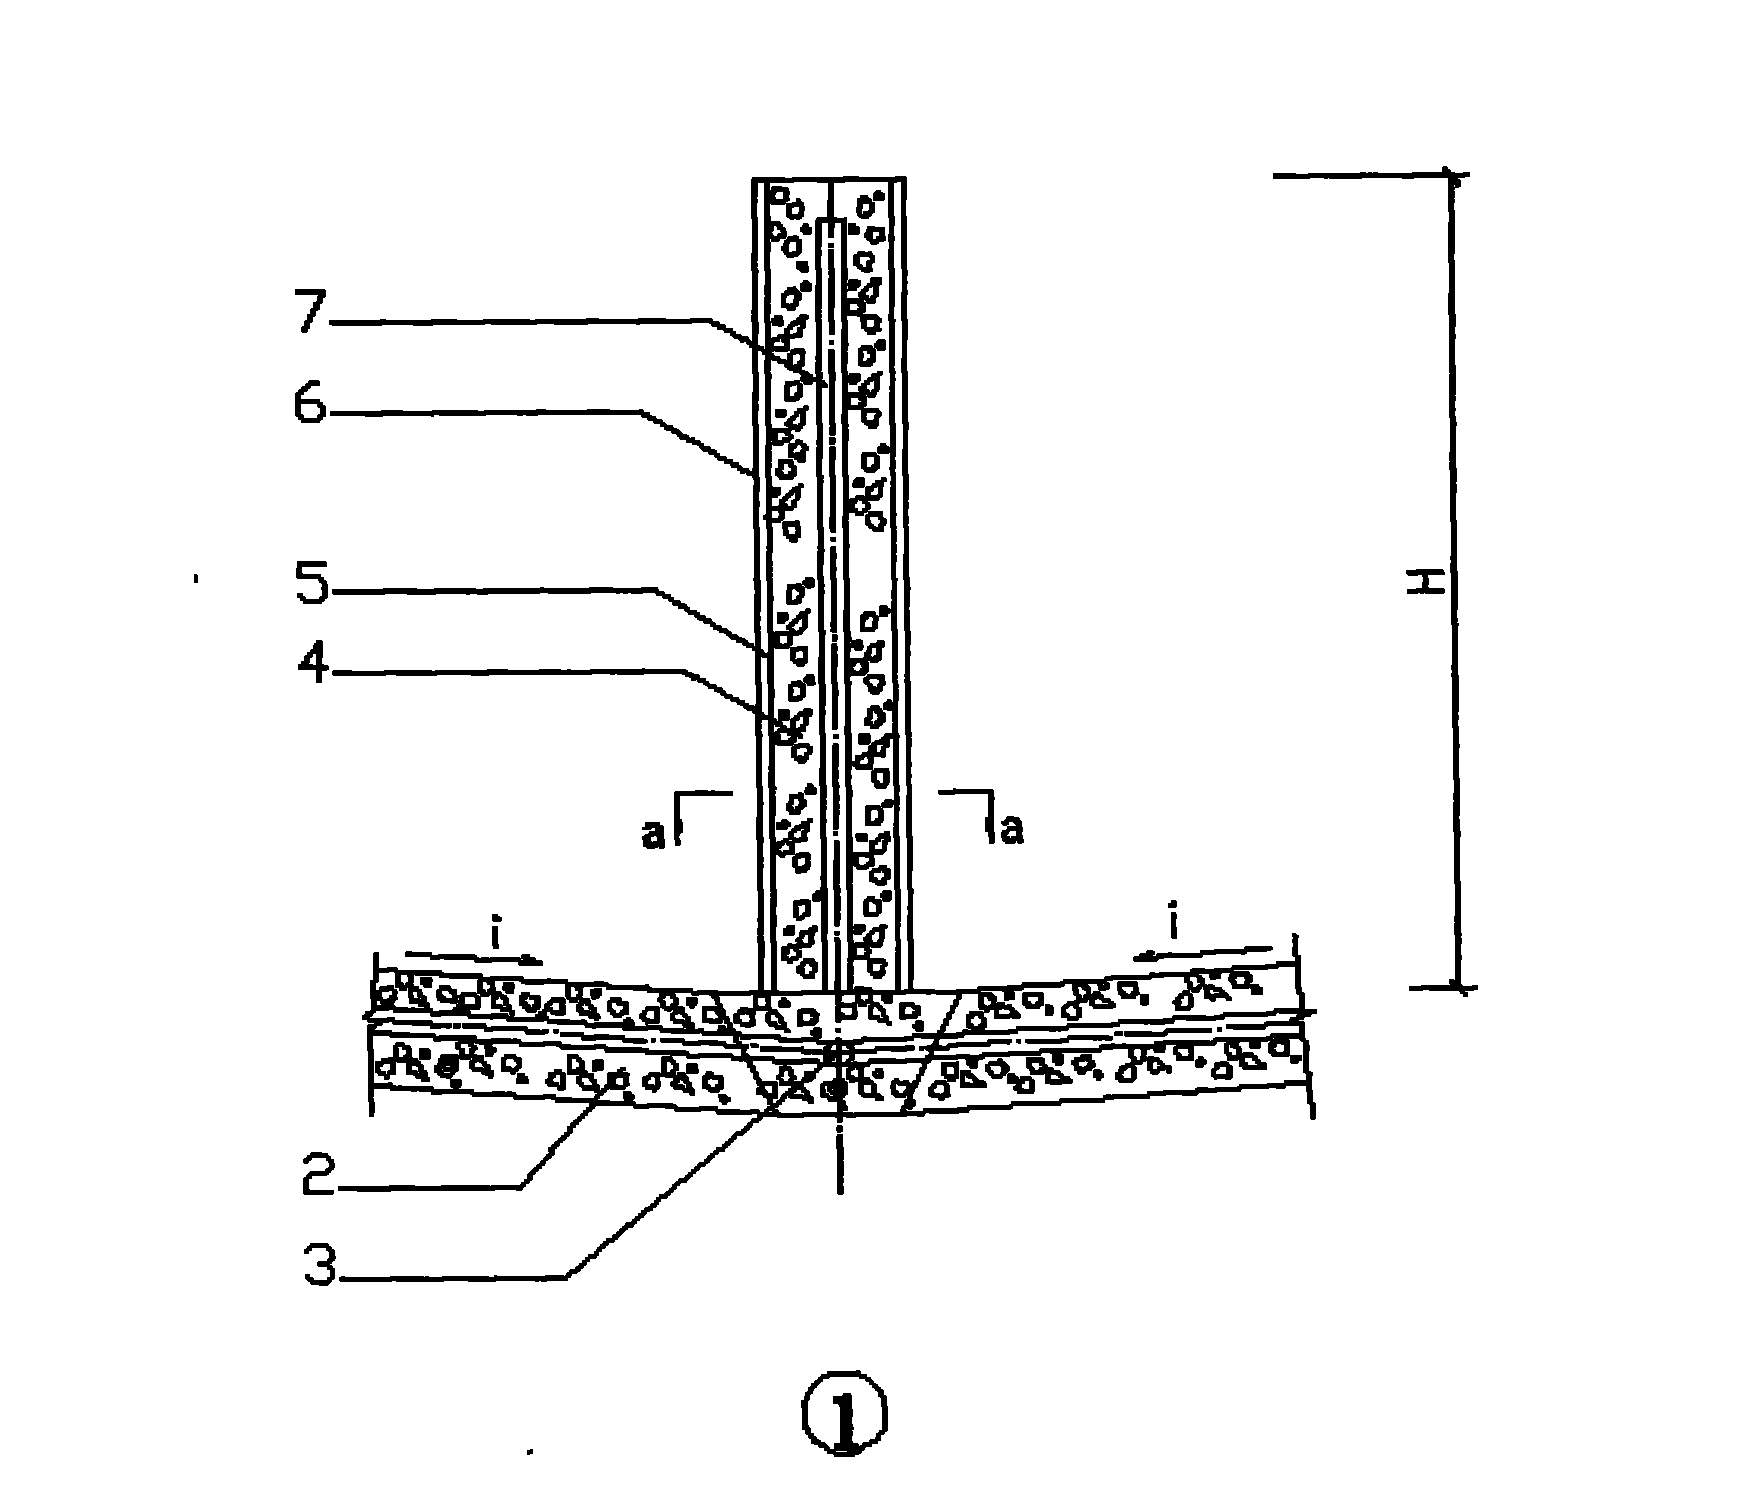 United draining system for effectively lowering seepage lines in fill dam of tailing reservoir